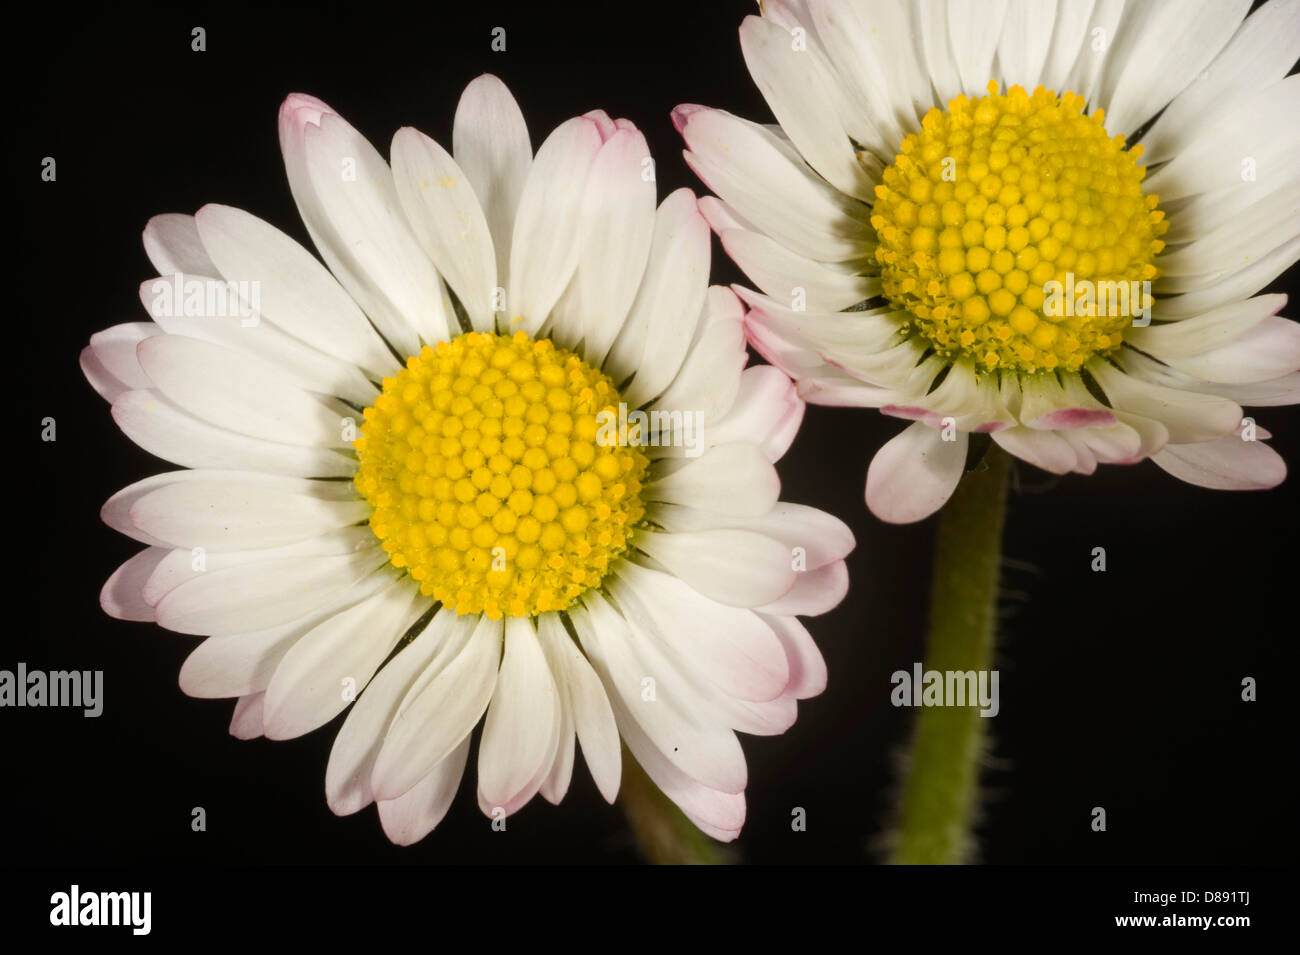 Flower of a daisy, Bellis perennis, with a slight pink tinge Stock Photo